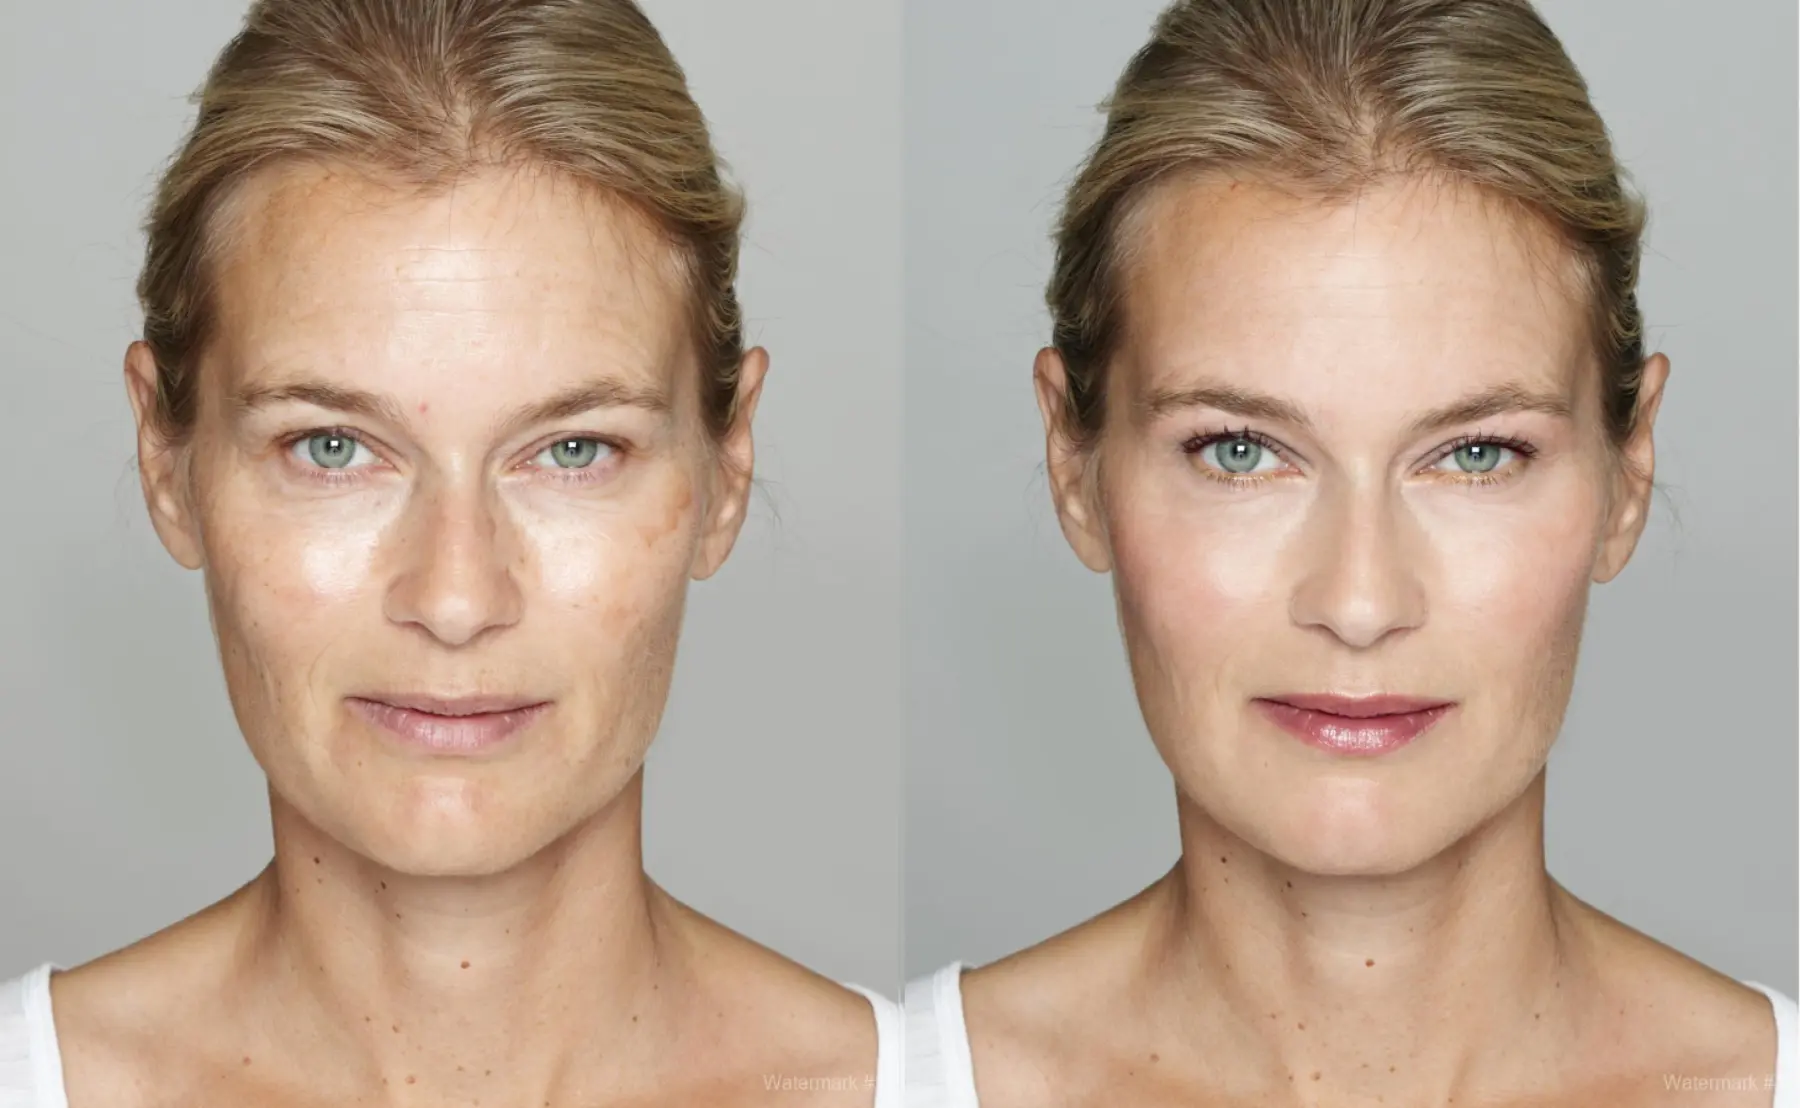 Fillers: Patient 1 - Before and After 1